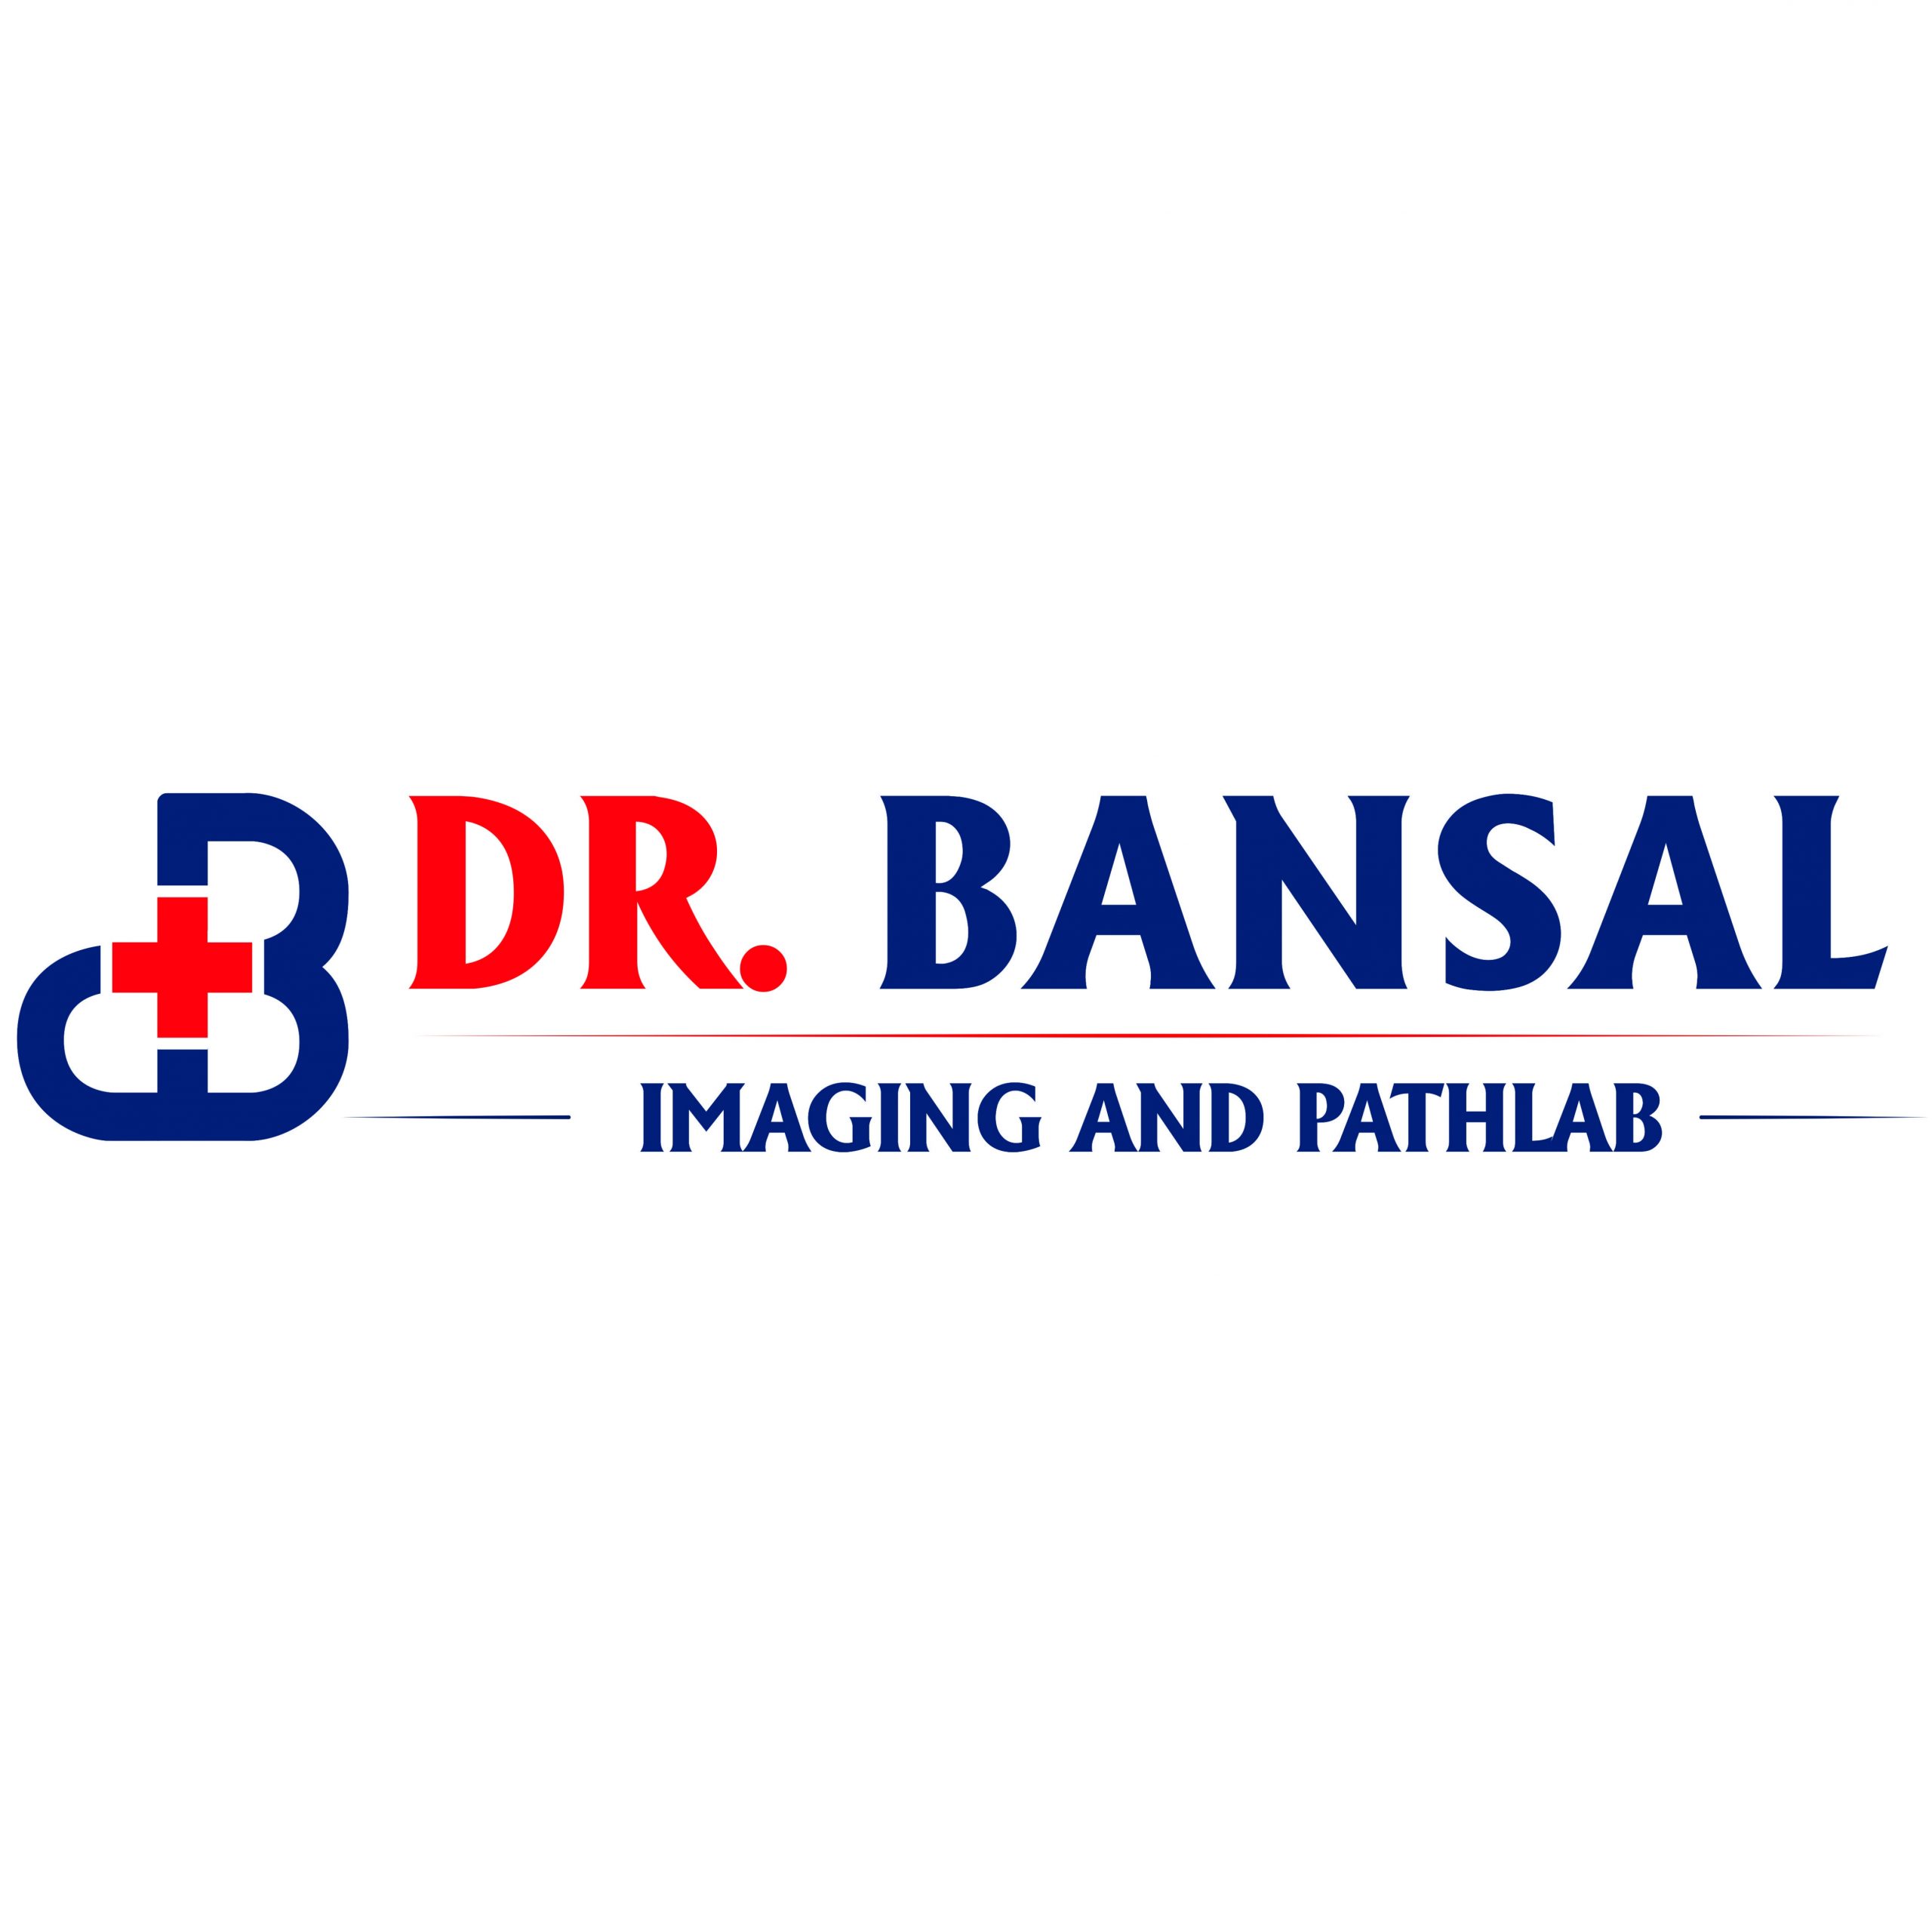 Dr. Bansal Imaging And Path lab logo - ONLINETOKEN - appointment booking software